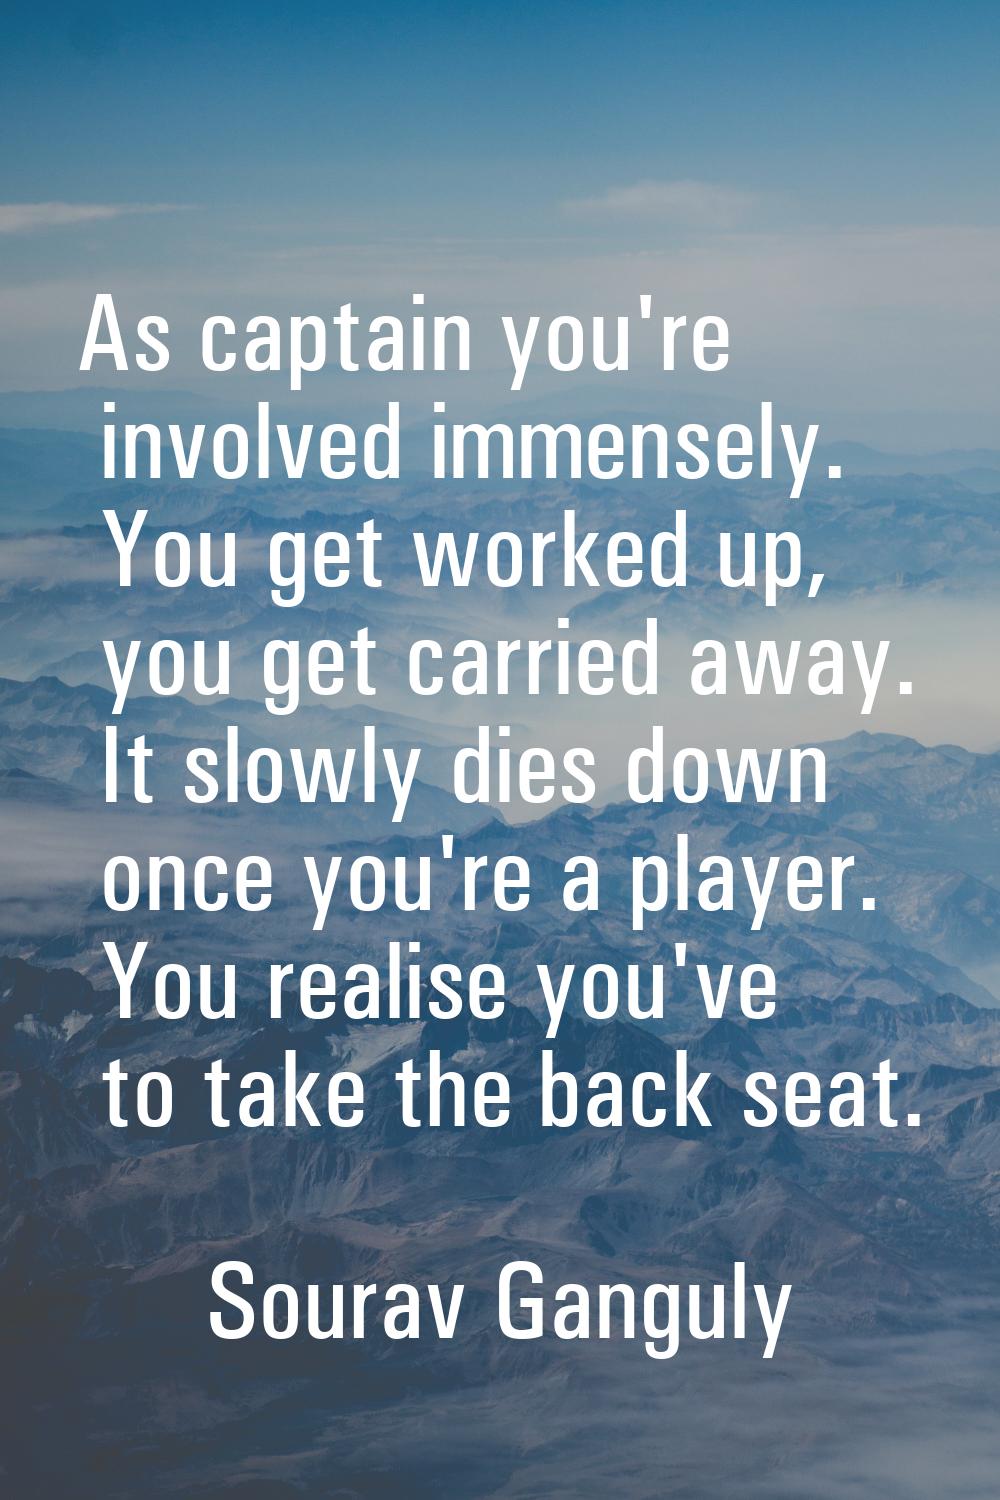 As captain you're involved immensely. You get worked up, you get carried away. It slowly dies down 